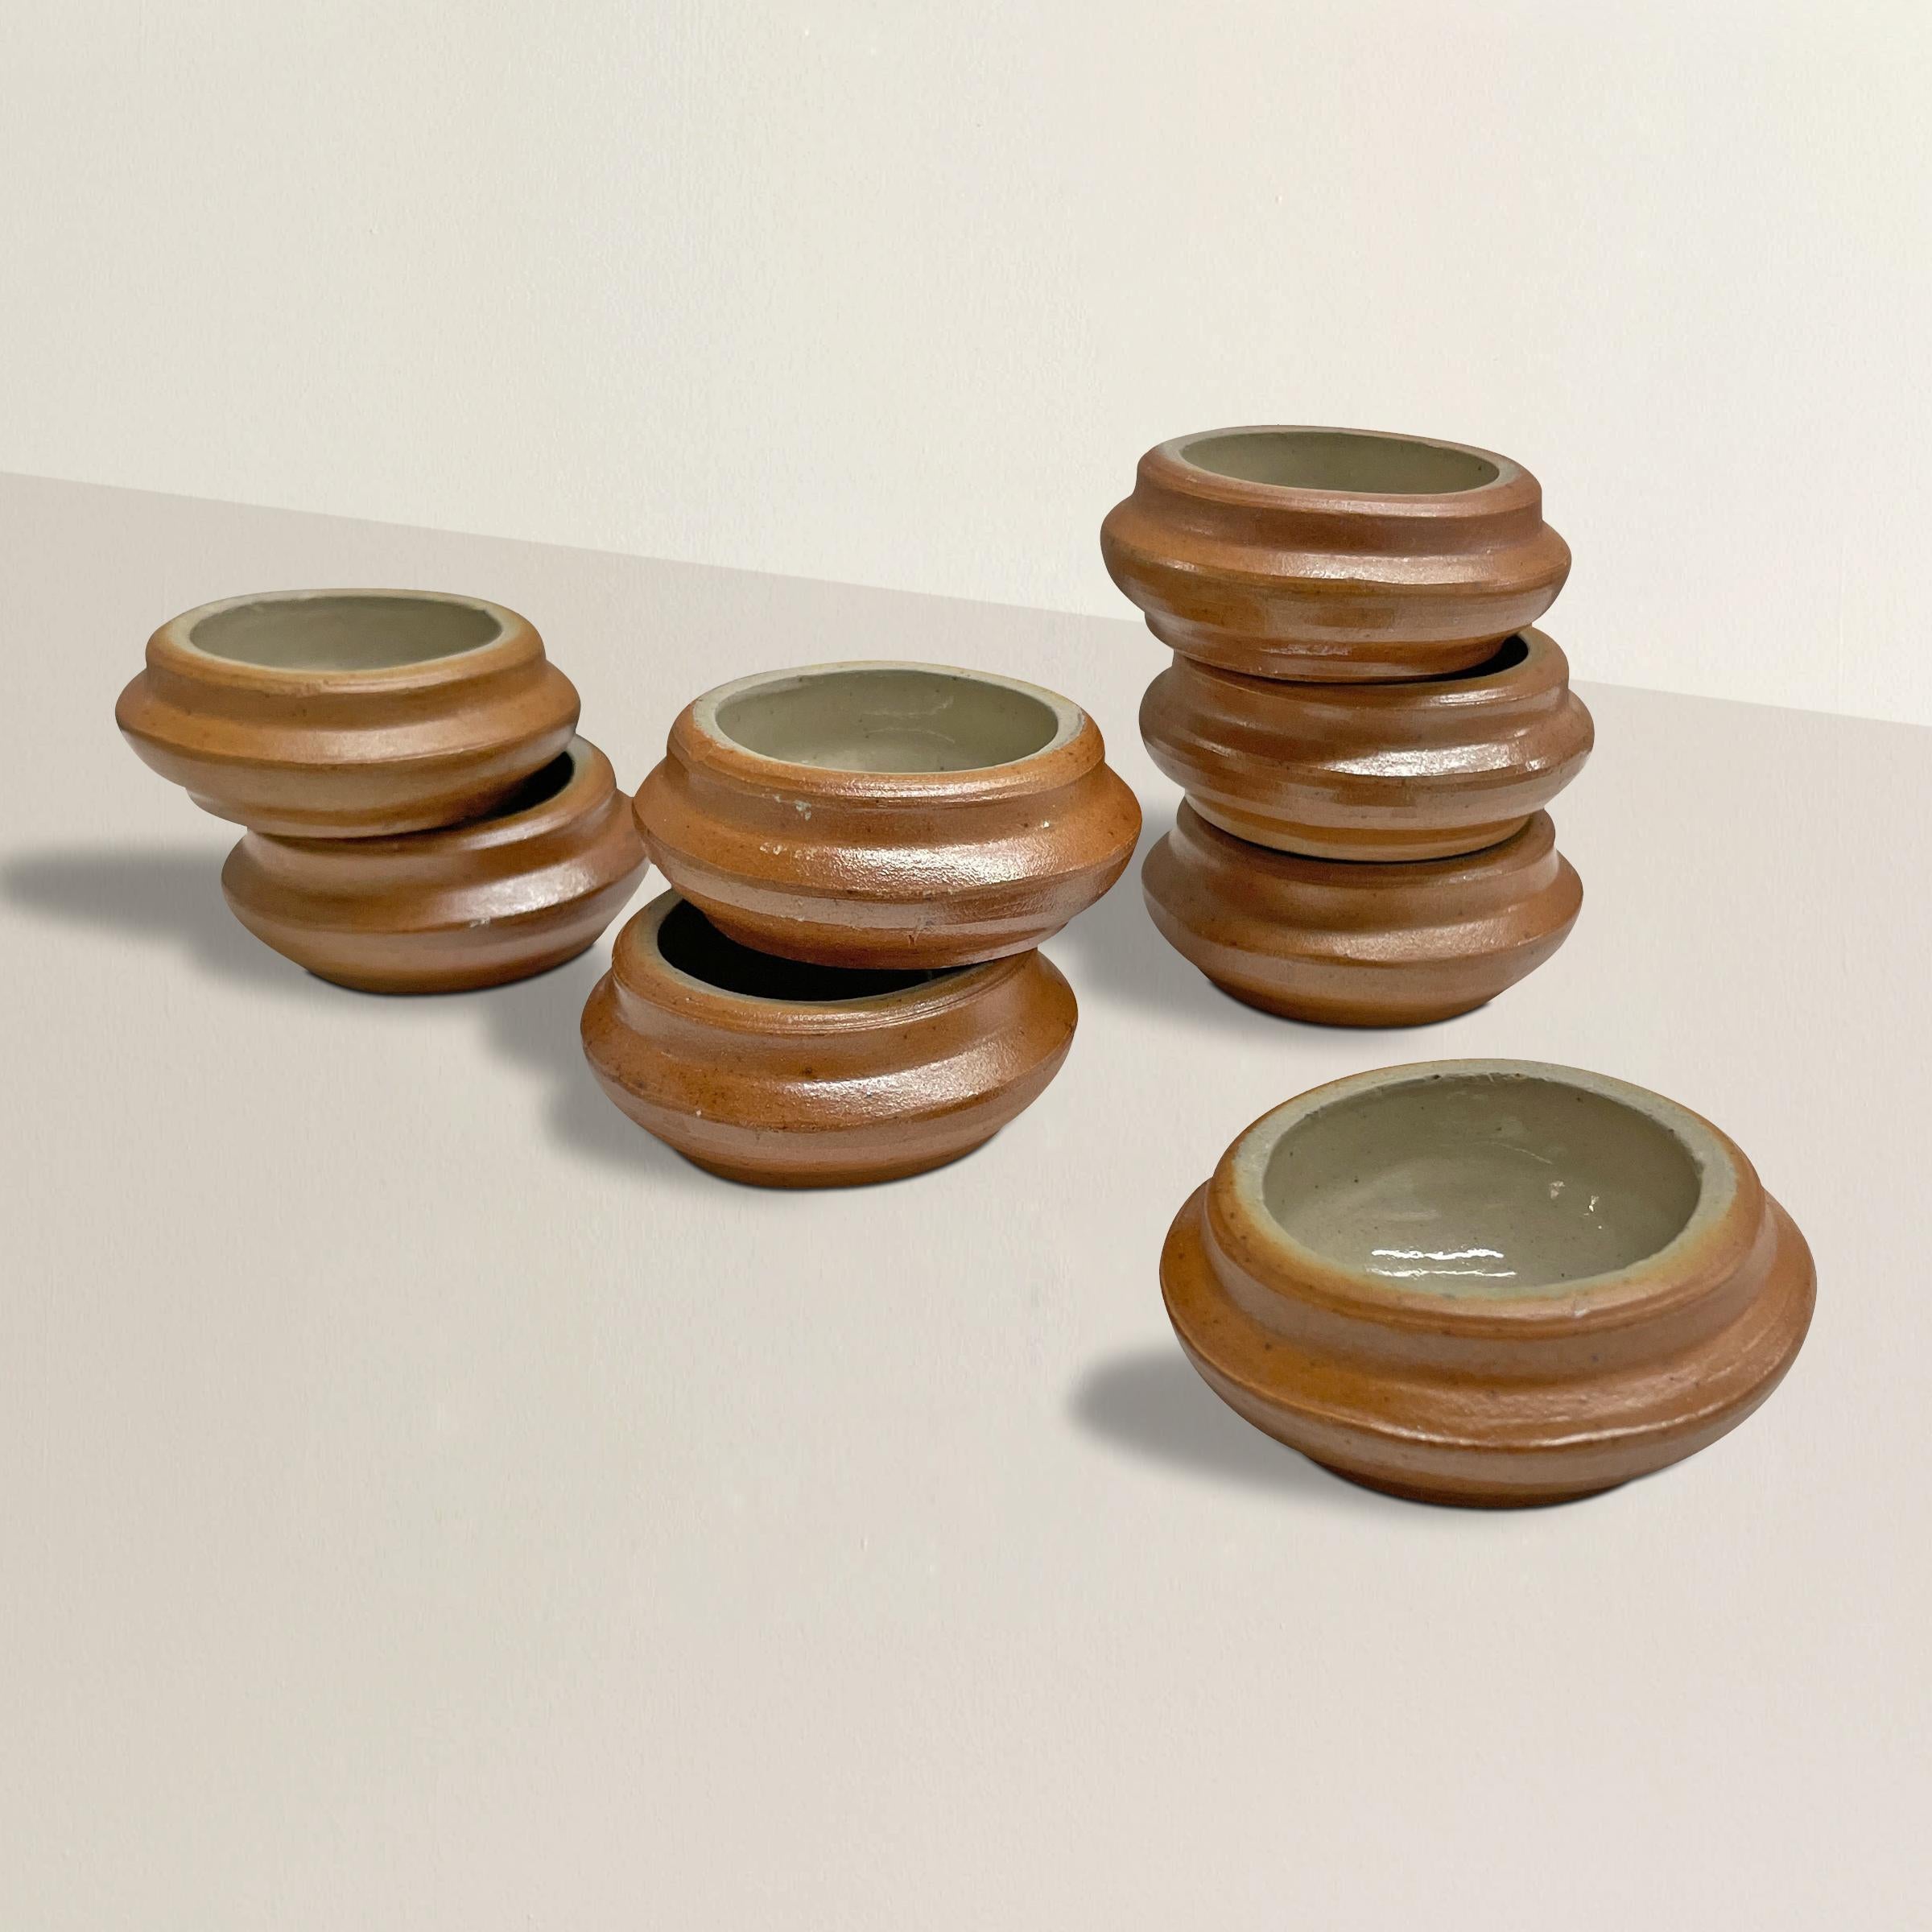 A wonderful set of eight early 20th century French ceramic salt cellars with a terracotta colored exterior and a shiny glazed interior. Perfect for salt at your next garden party, or for your mise en place in your home kitchen, filled with spices